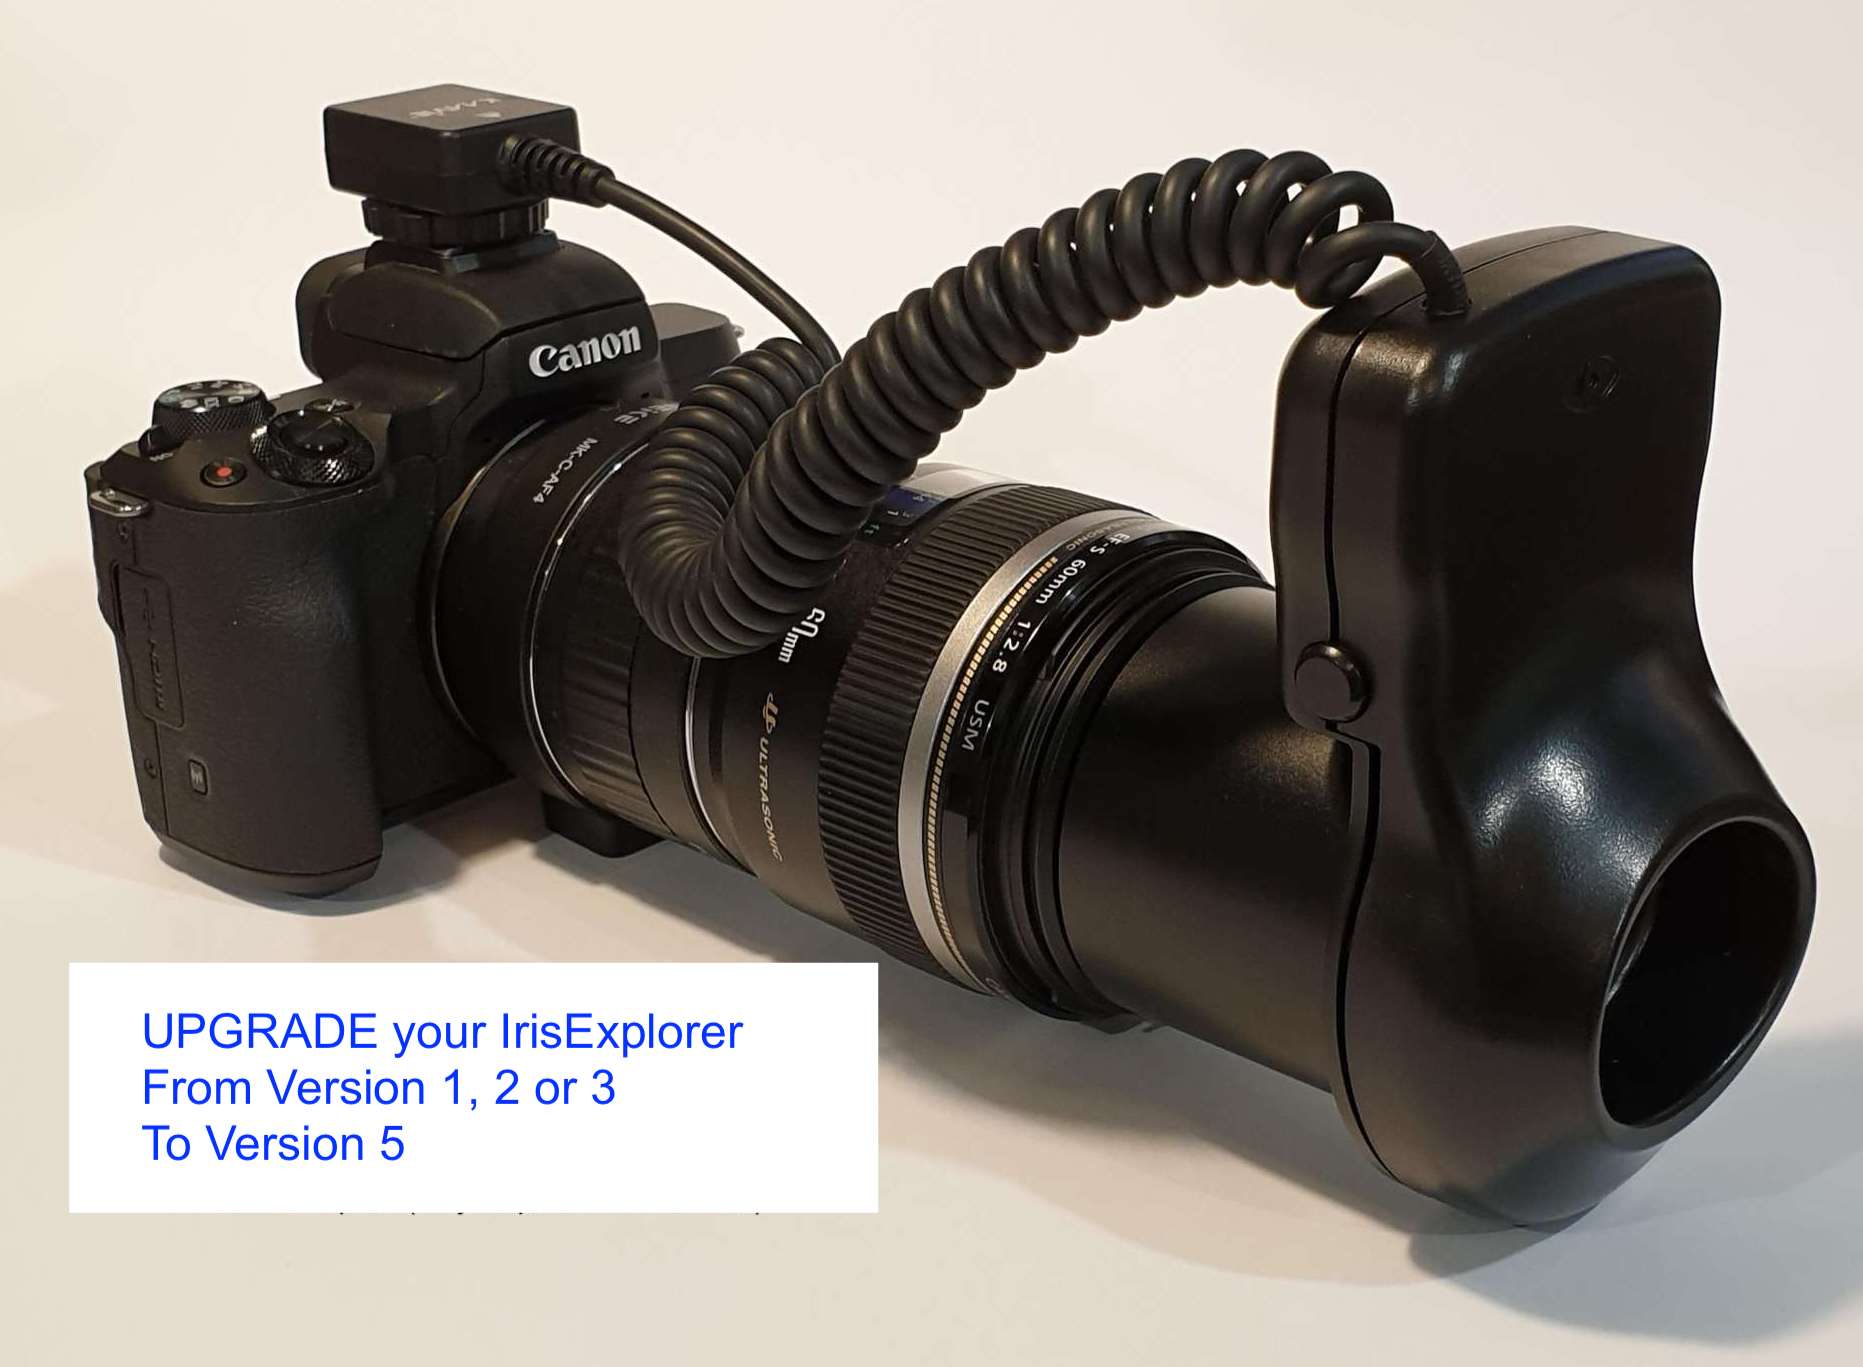 IrisExplorer v5.1 features: improved comfort and enhanced imagery.